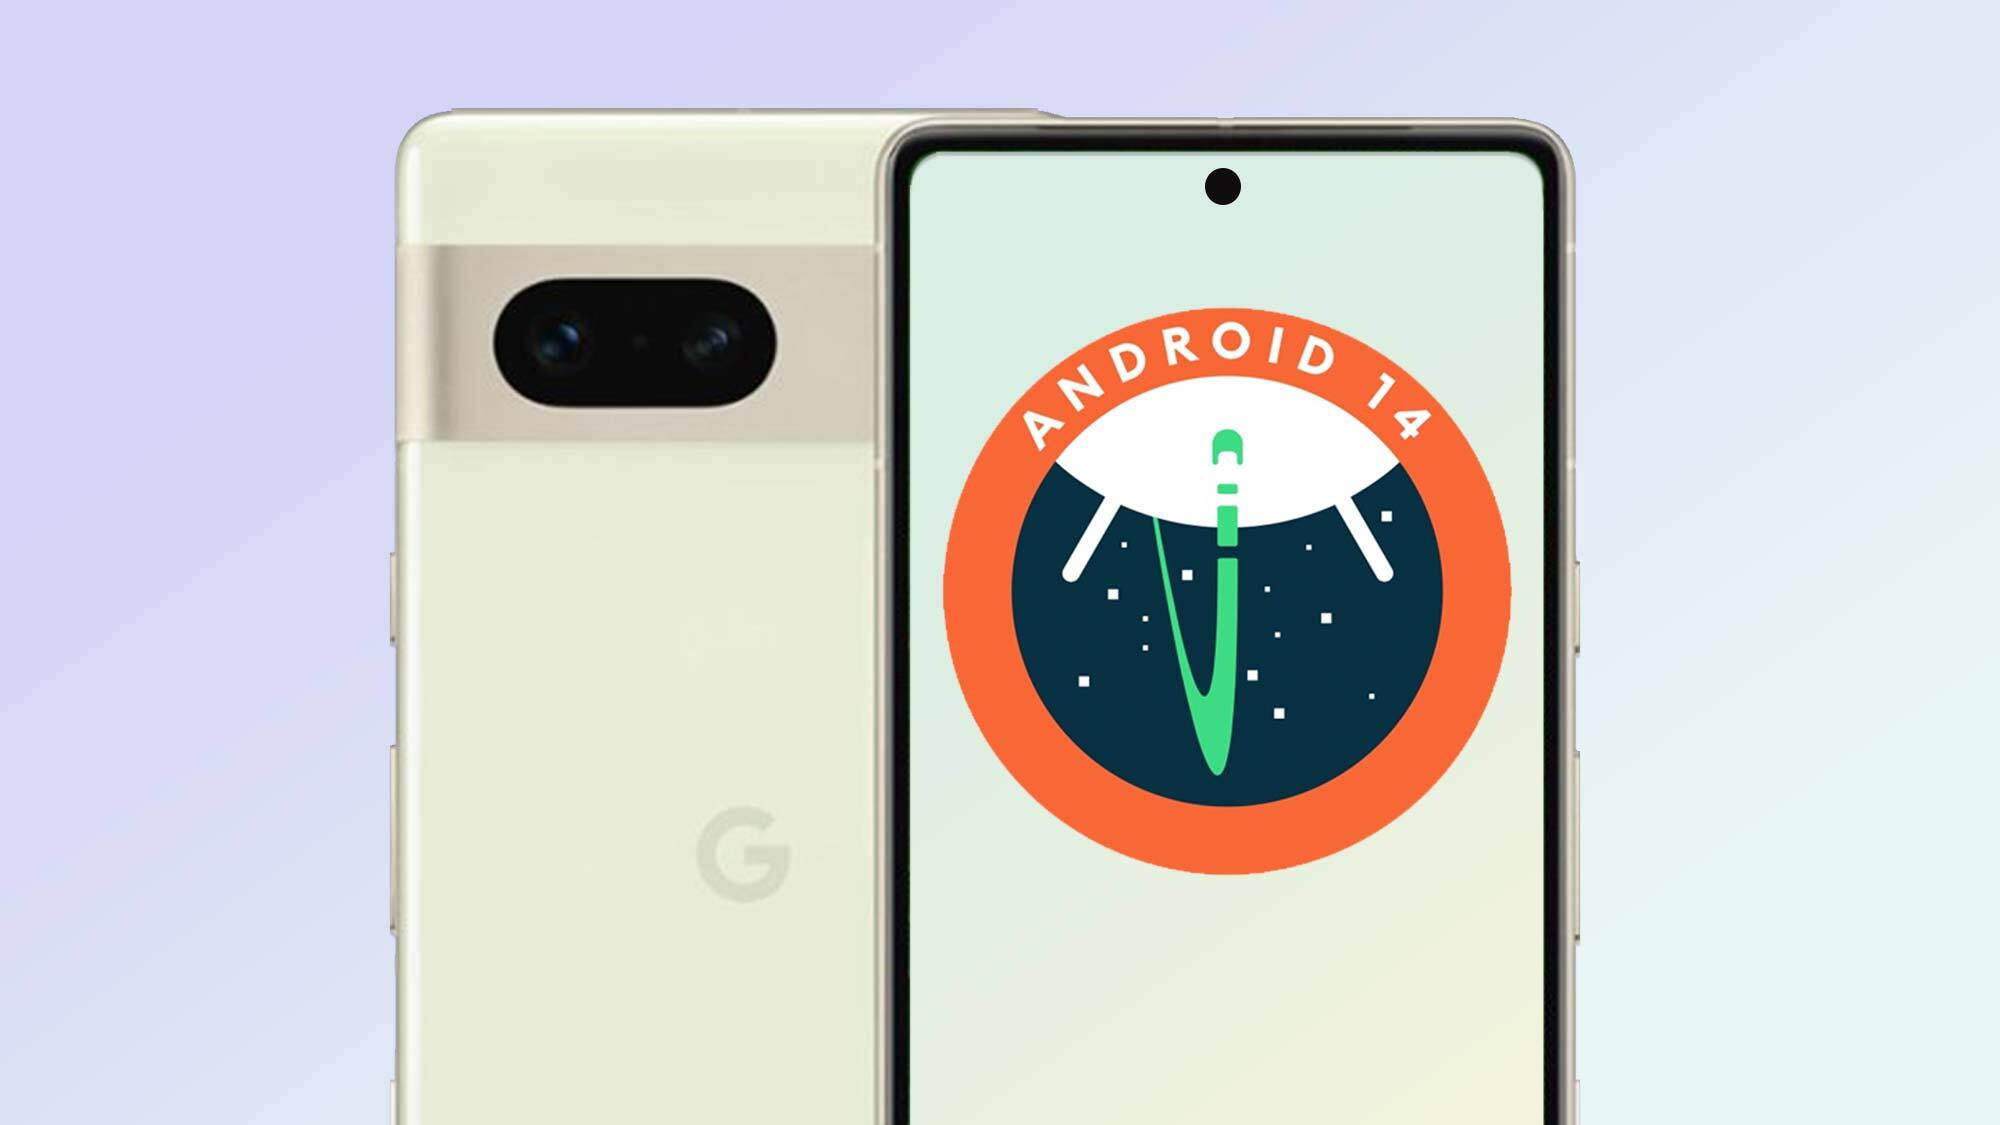 When is my phone getting Android 14? Here's everything we know